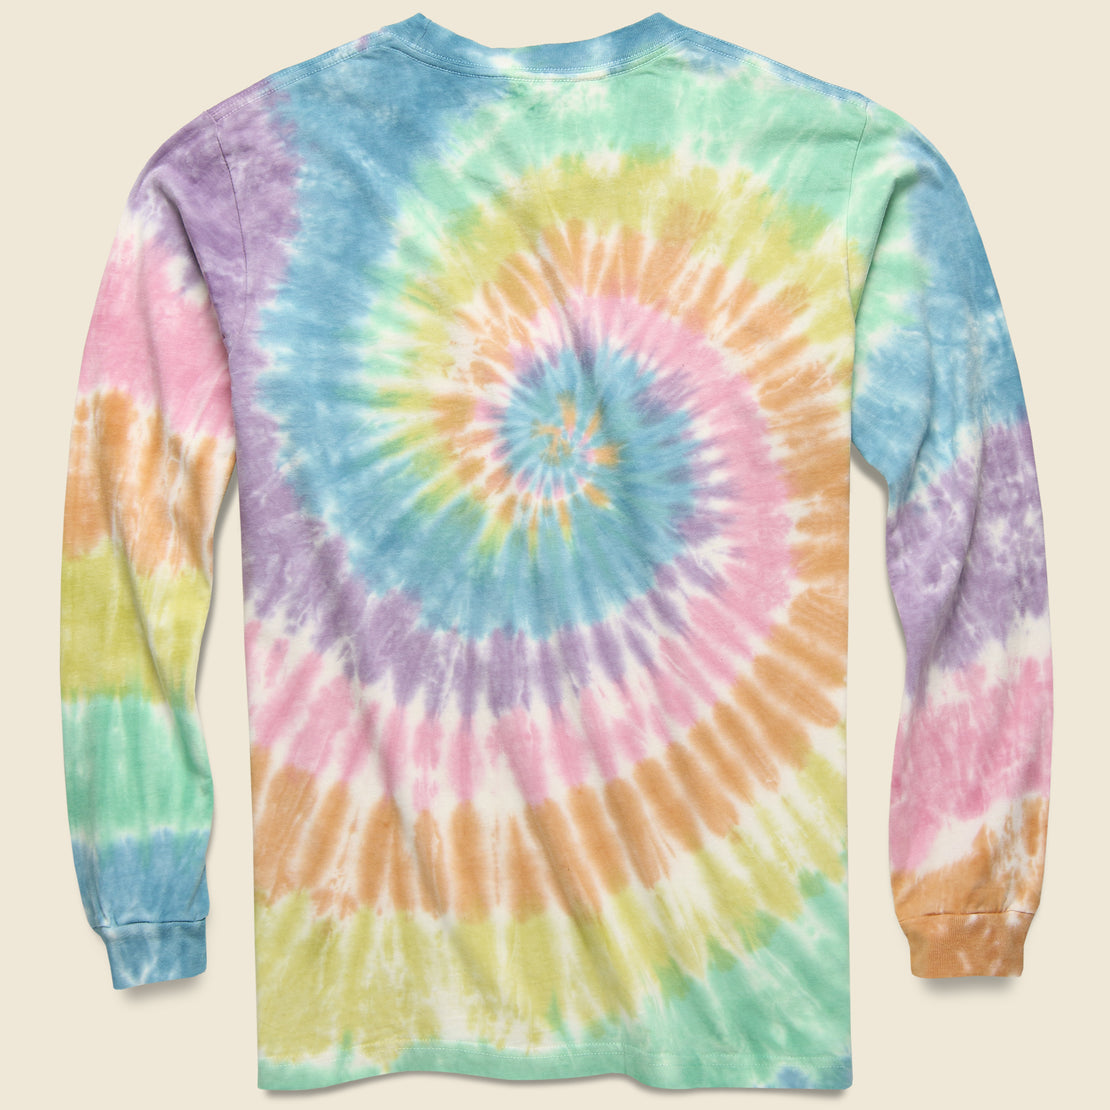 Long Sleeve Pocket Tee - Spiral Tie Dye - Battenwear - STAG Provisions - Tops - L/S Tee